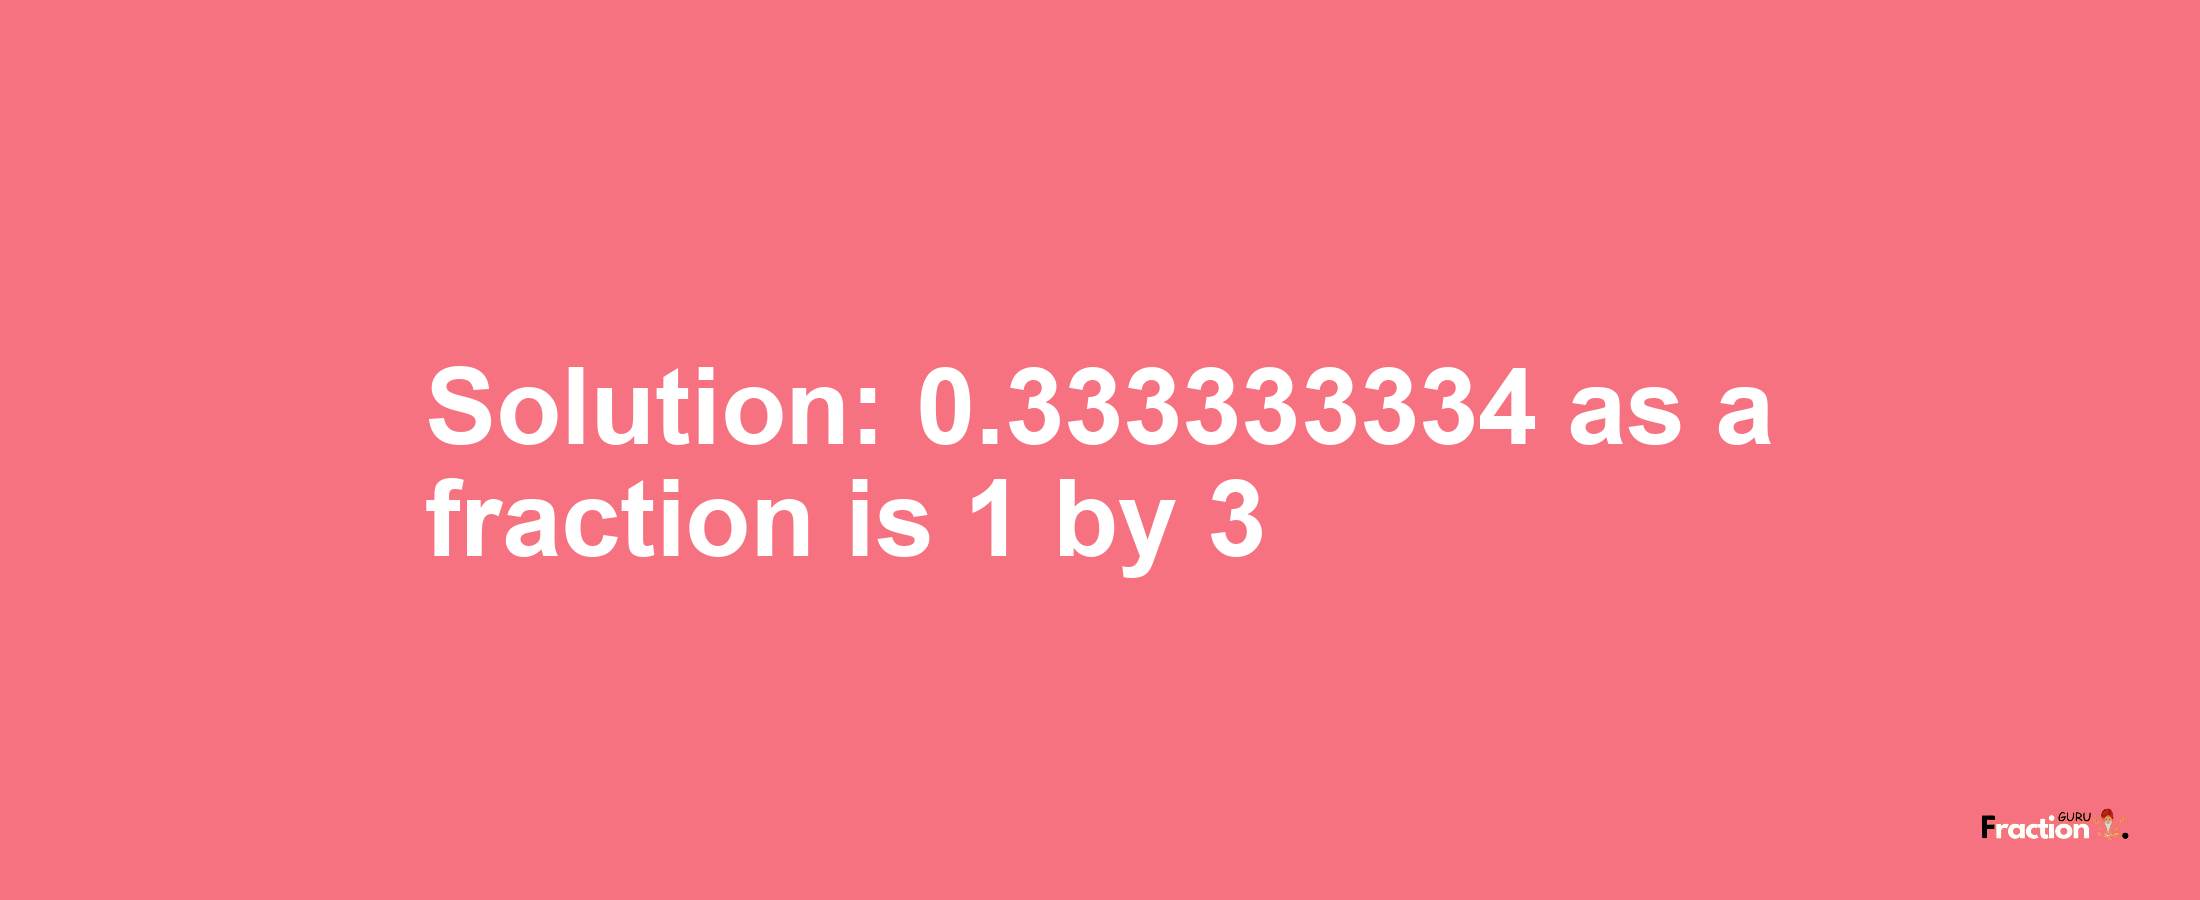 Solution:0.333333334 as a fraction is 1/3